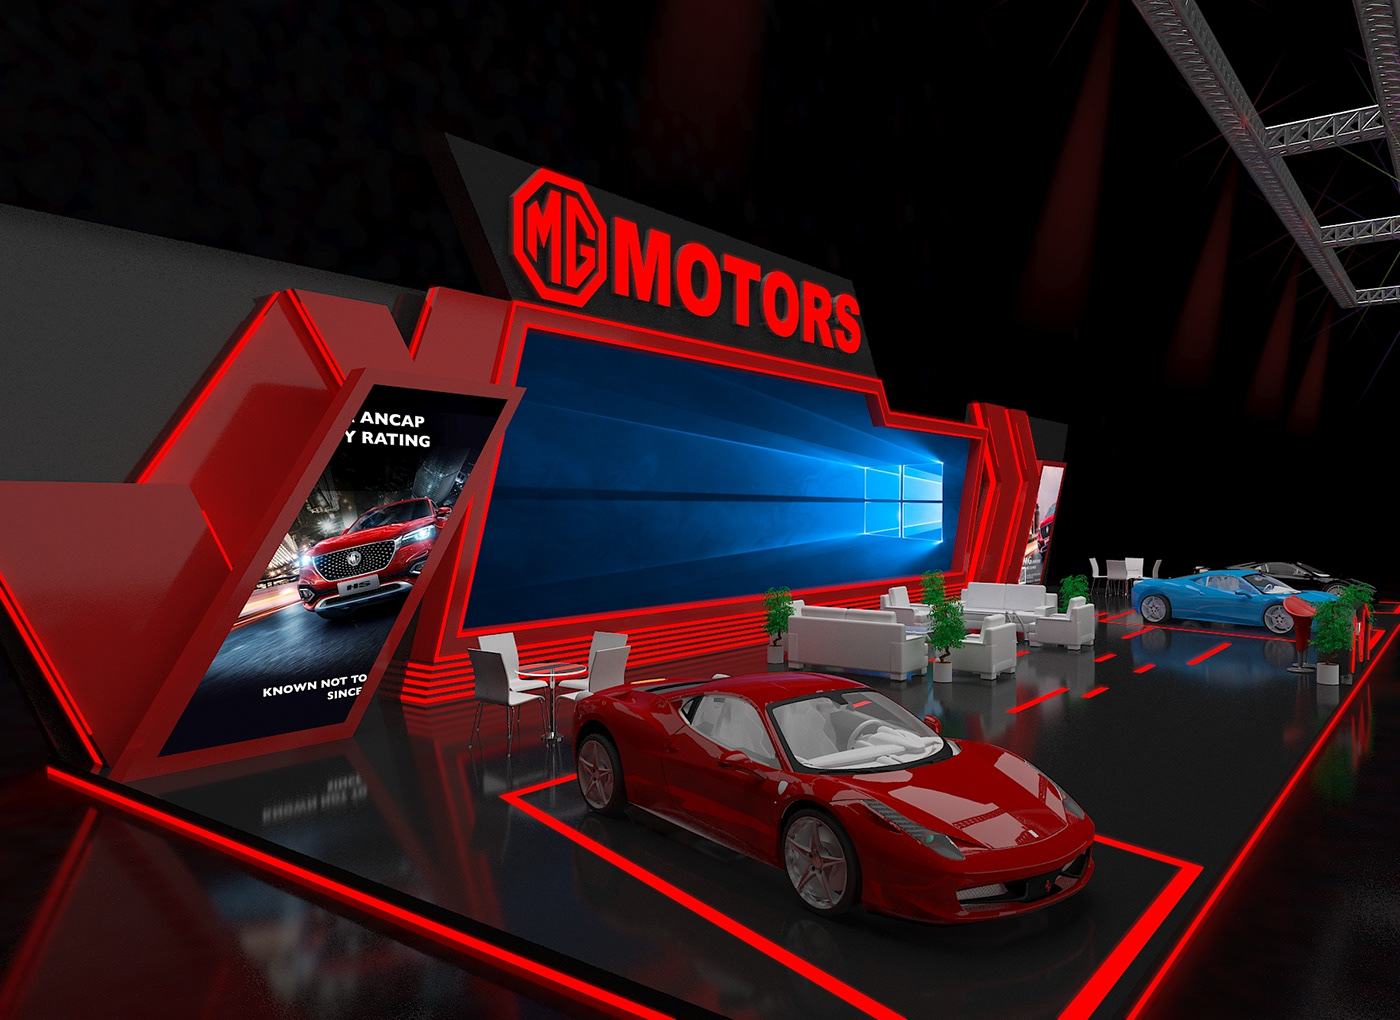 marketing   Advertising  Trade Show exhibition stand booth design trade show booth Exhibition Booth visualization architecture 3d modeling 3D booth